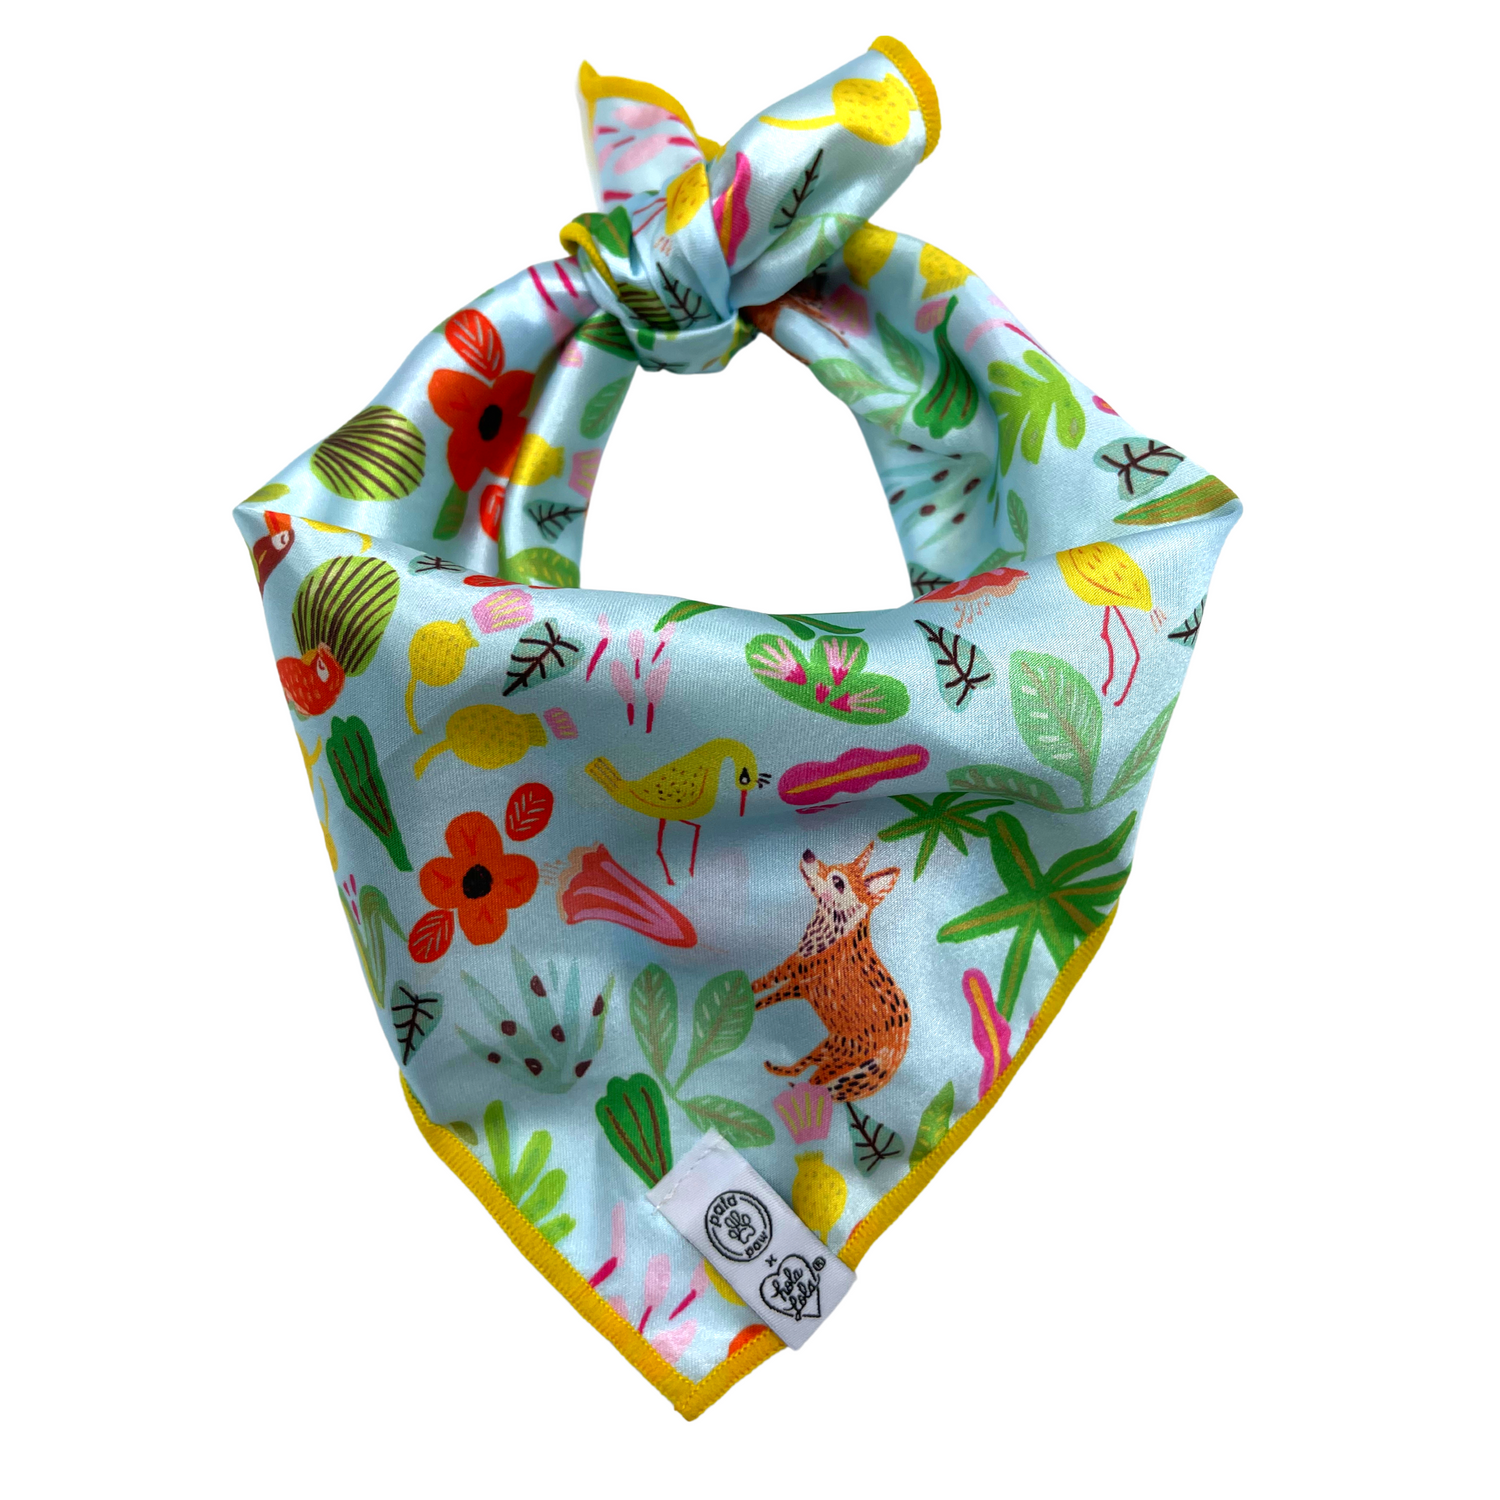 Pata Paw x Holalola bandana for dogs, cats and humans